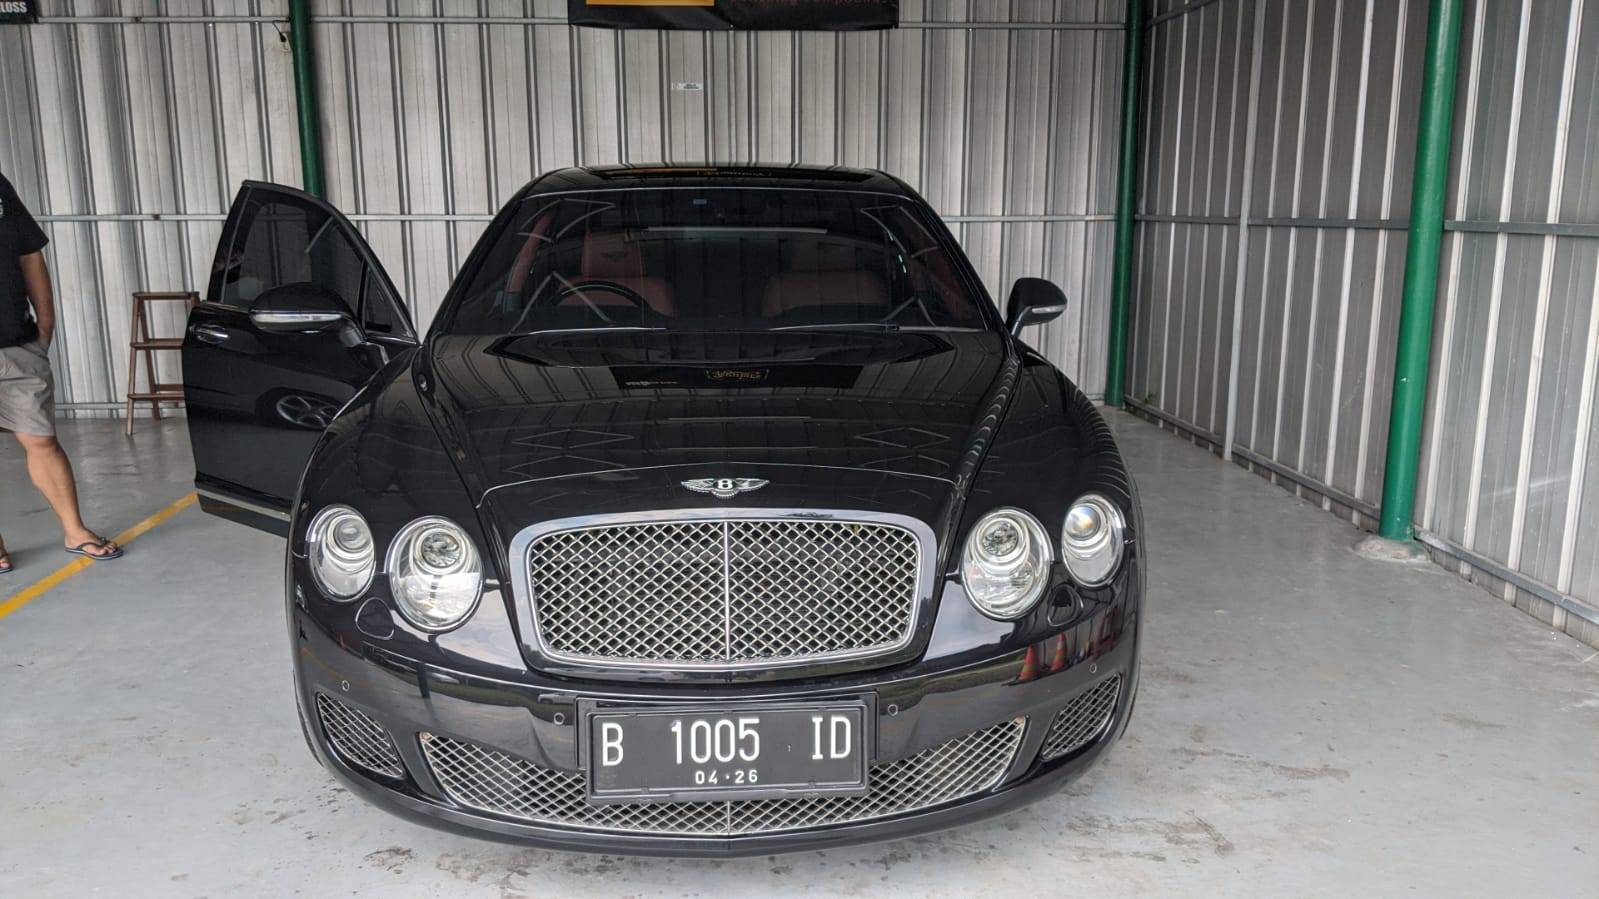 Used 2011 Bentley Flying Spur 6.0 L W12 6.0 L W12